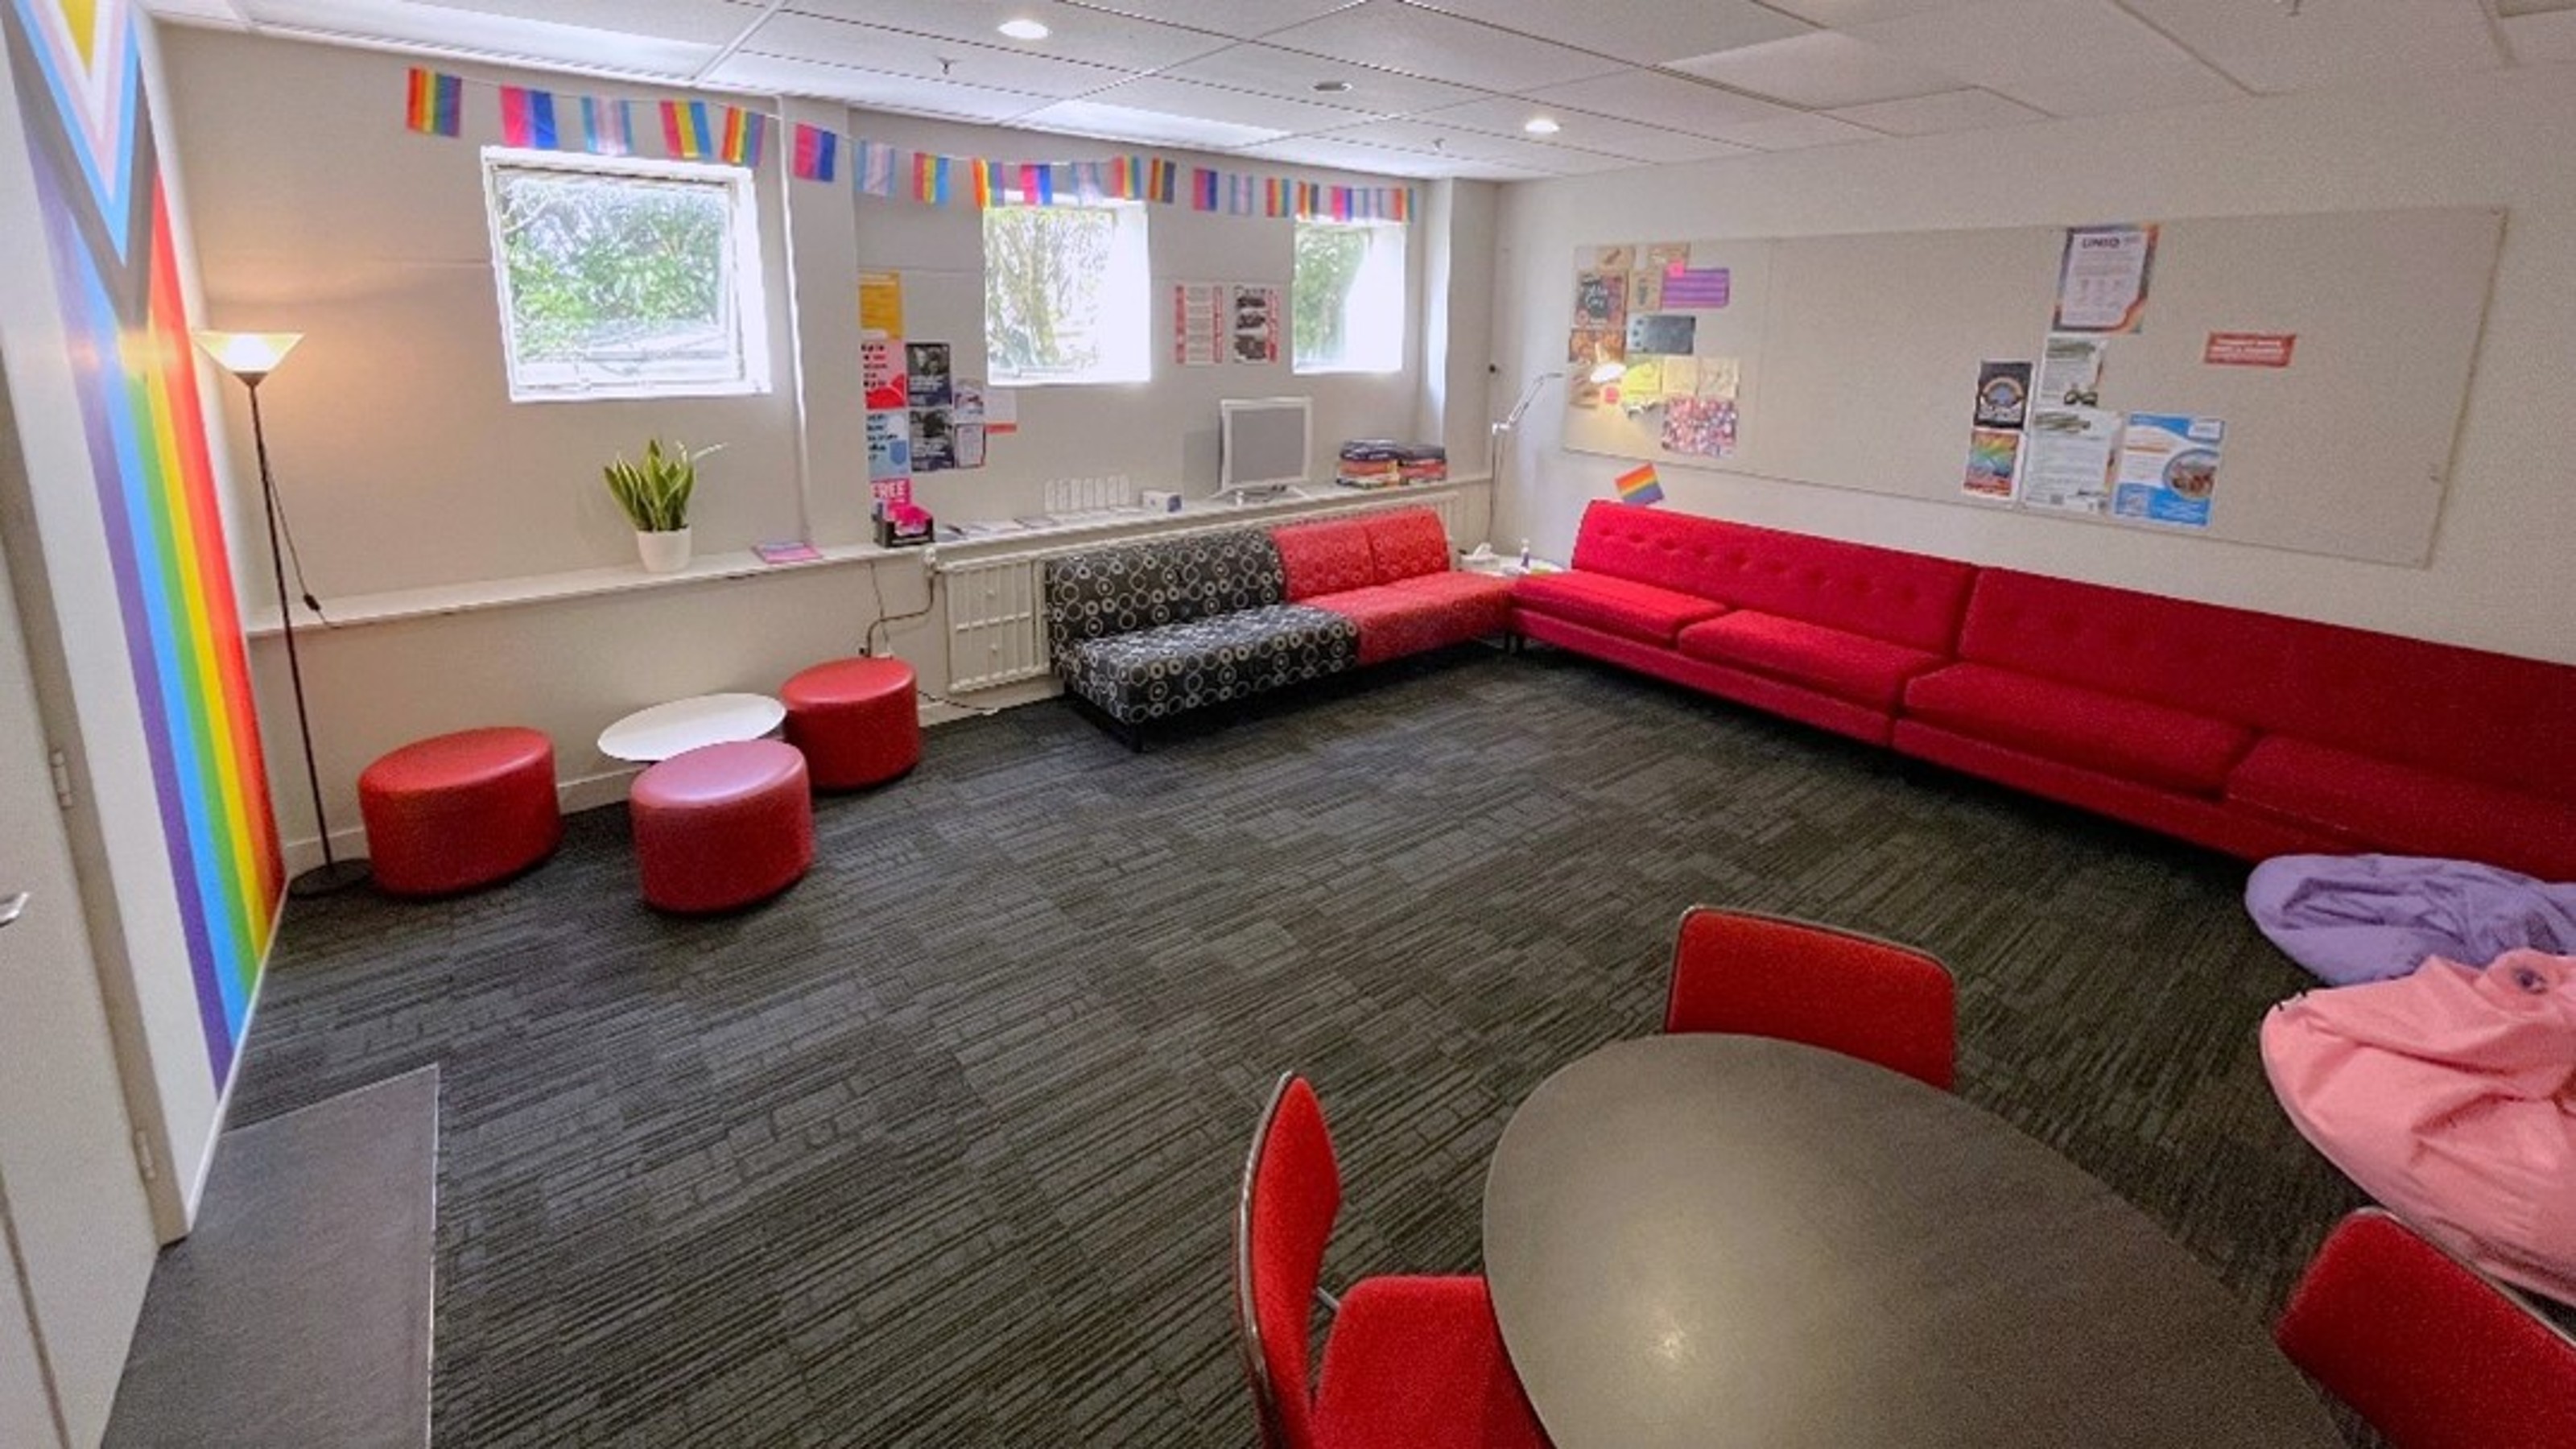 A well lit room with a dark textured carpet, red and black sofas, and a round table with red chairs. The room is decorated with LGBTQ+ pride flags.